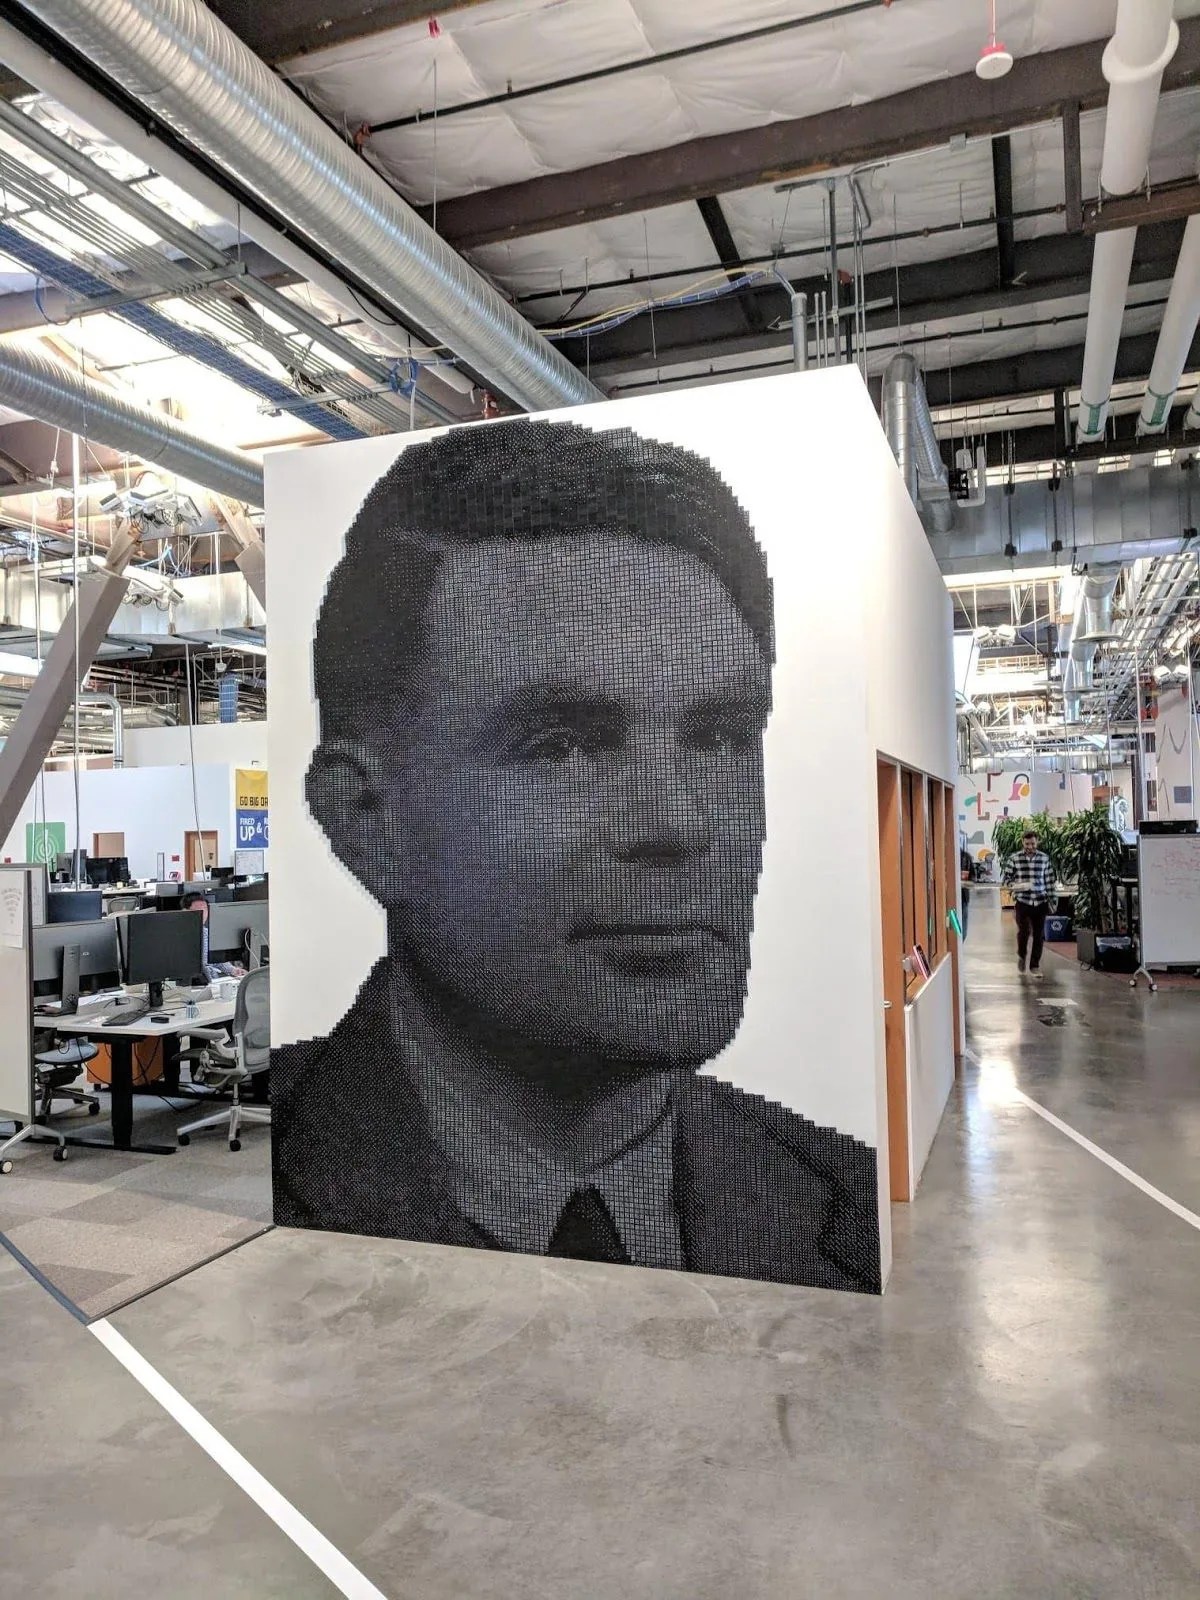 A mural of Alan Turing made out of dominoes at Facebook’s headquarters